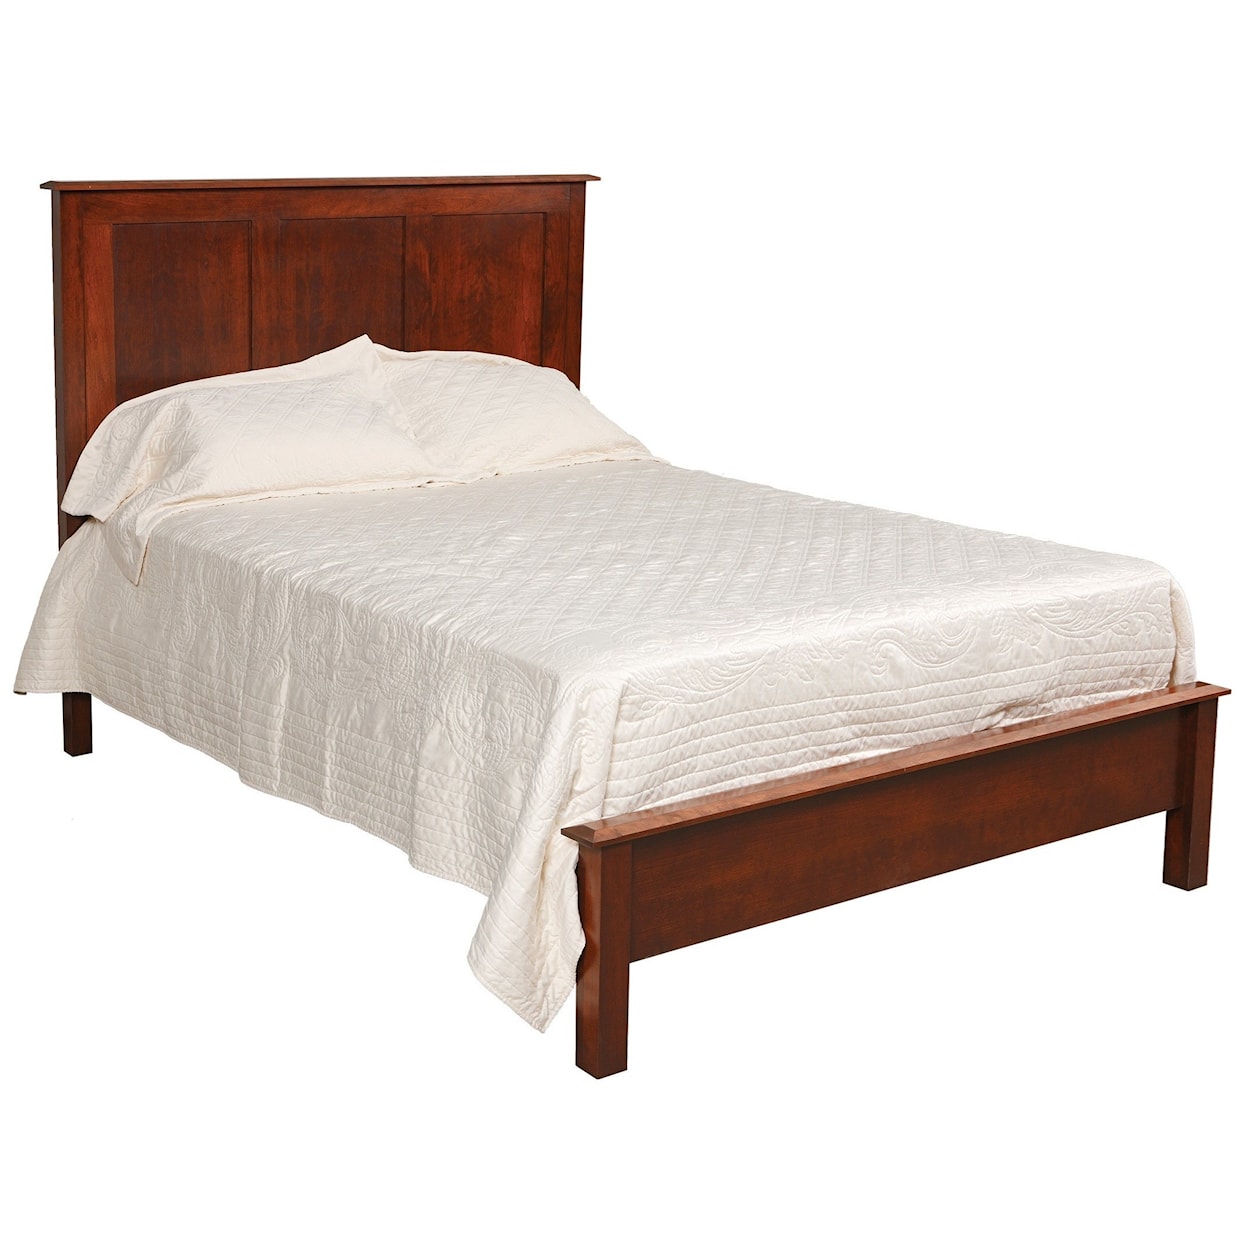 Daniels Amish Manchester Solid Wood Twin Bed